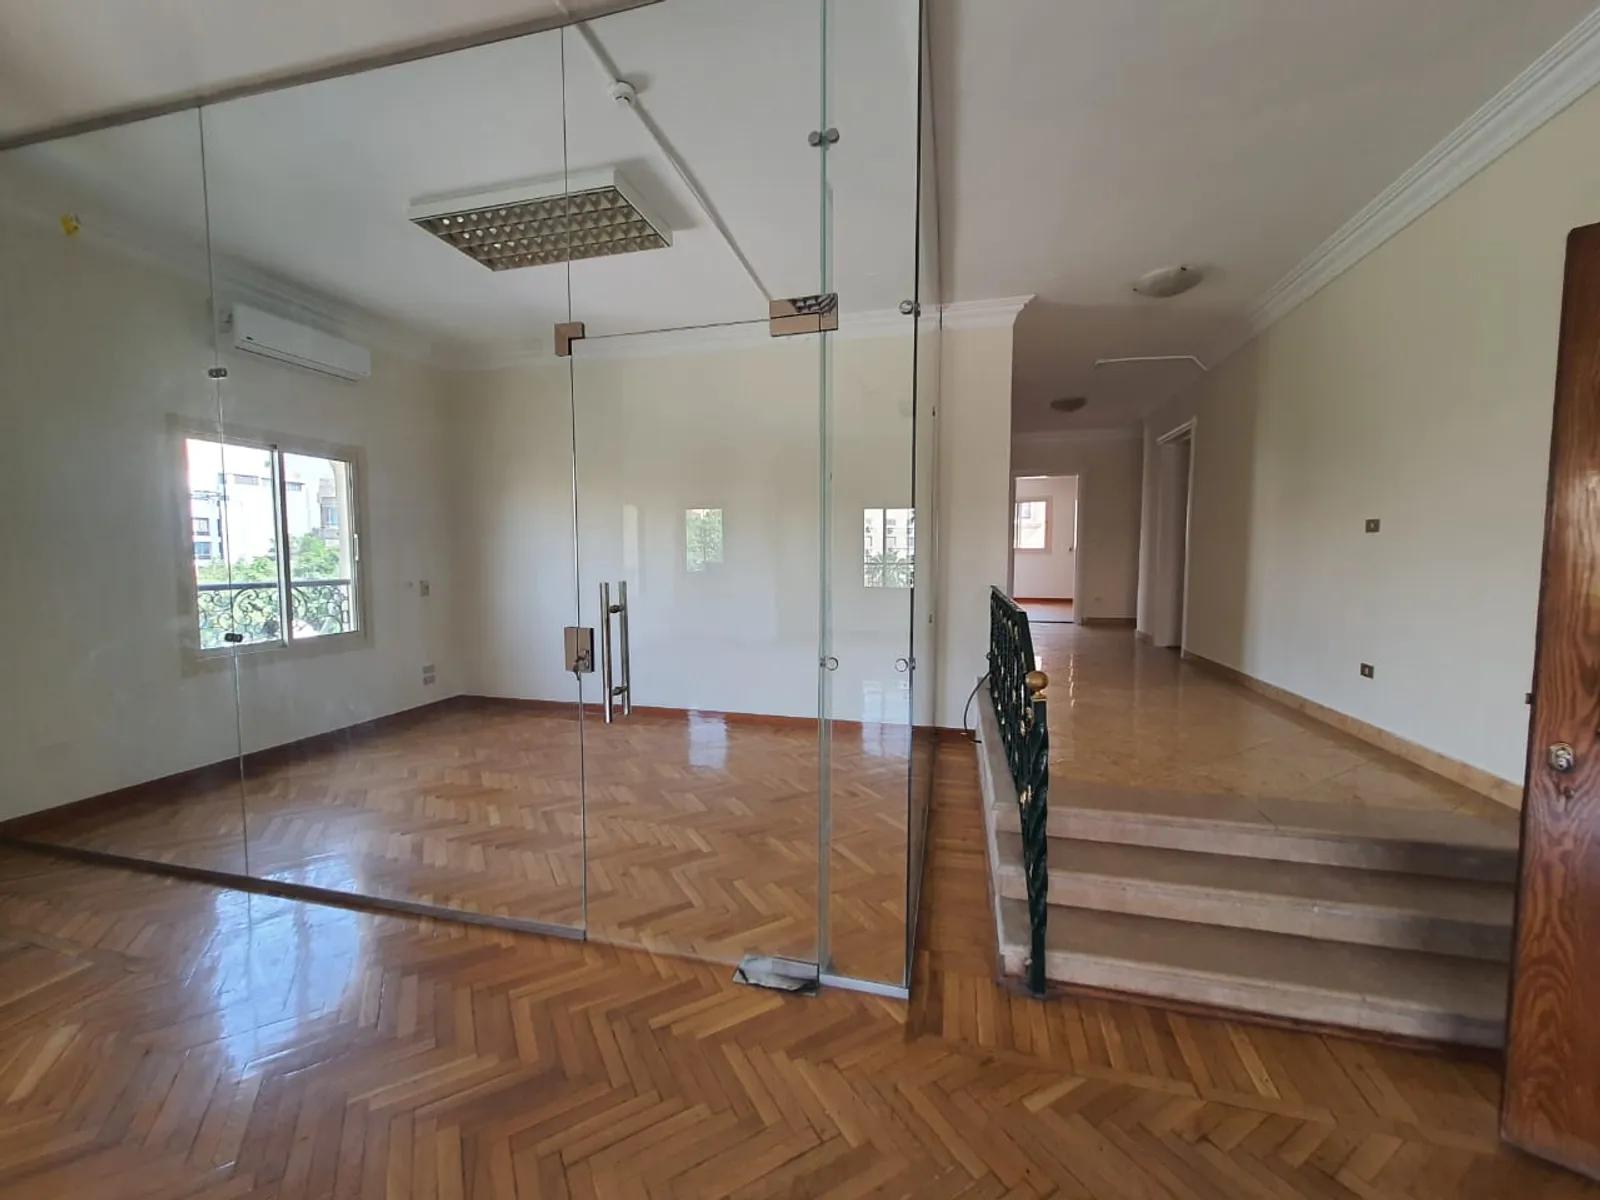 RECEPTION  @ Office spaces For Rent In Maadi Maadi Degla Area: 350 m² consists of 6 Bedrooms 4 Bathrooms Semi furnished 5 stars #5571-2